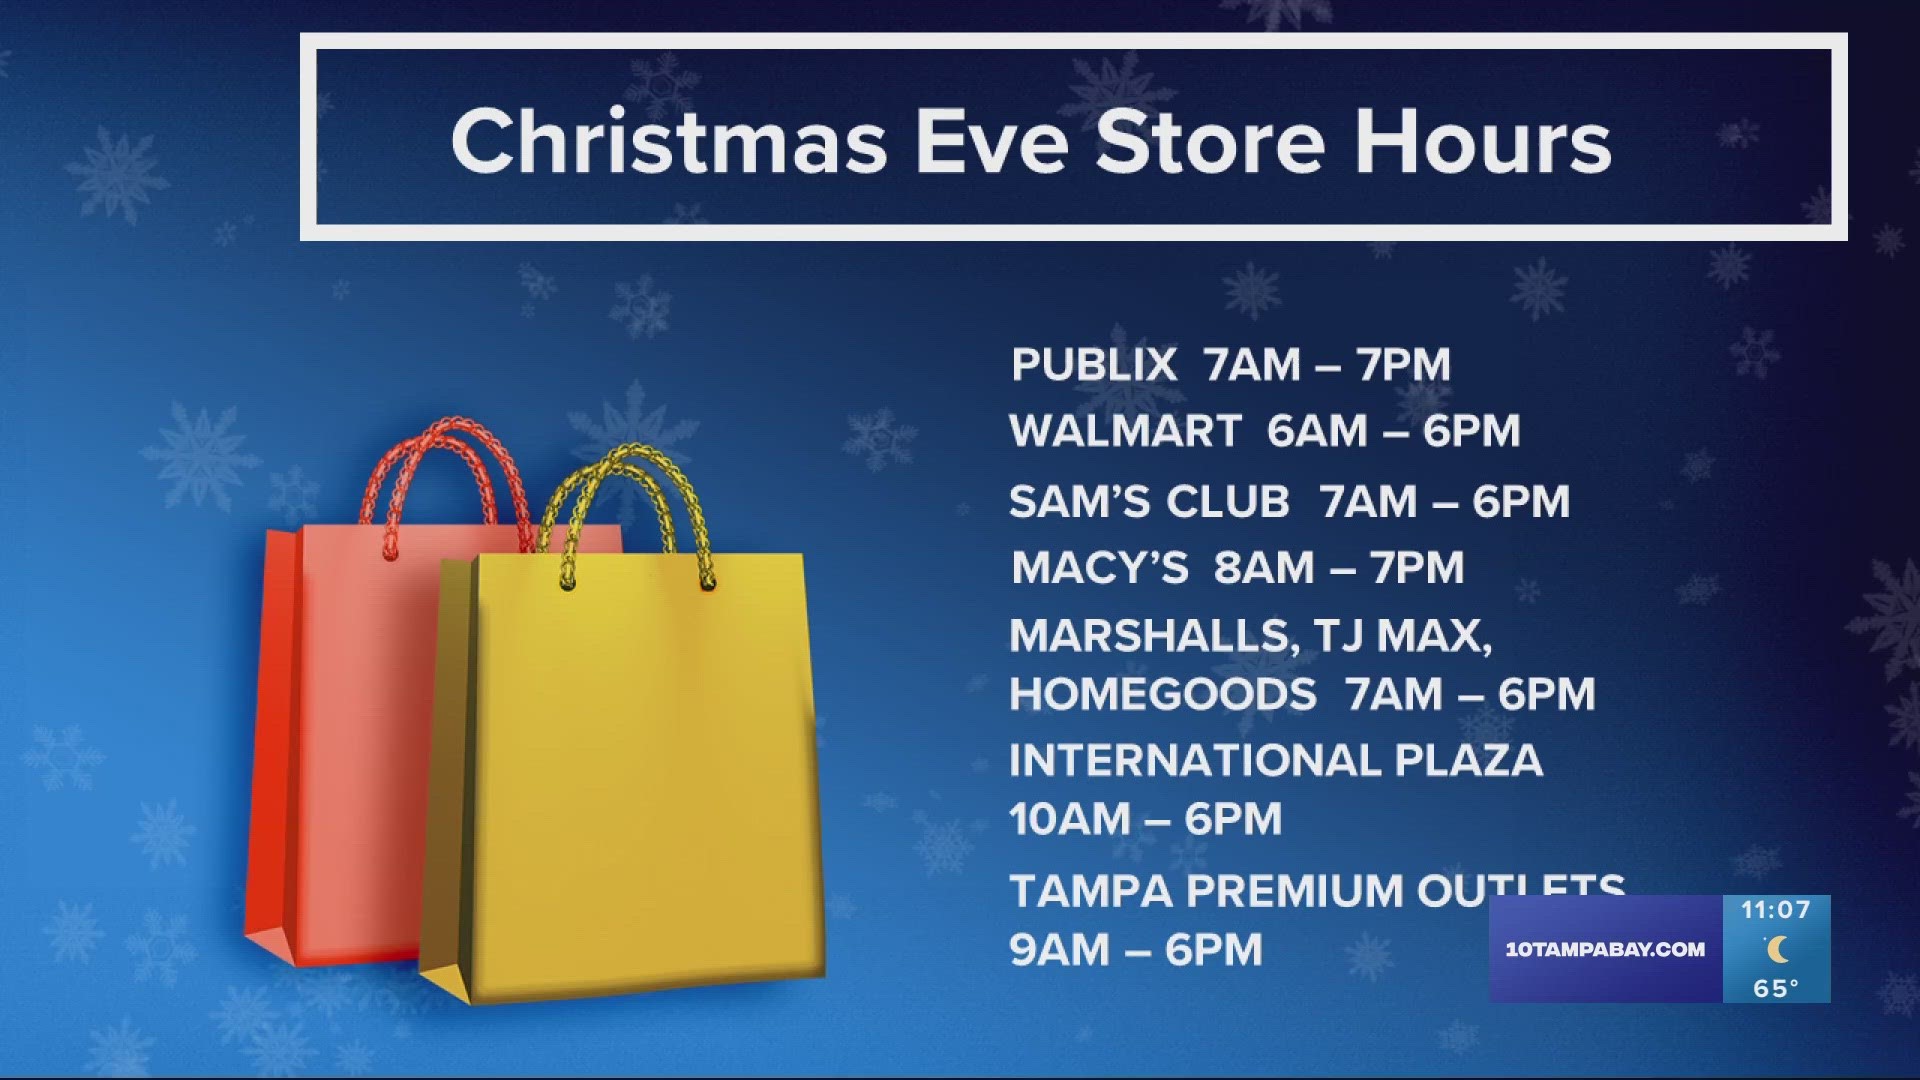 These major stores will be open on Christmas Eve with adjusted hours. Here are the hours.